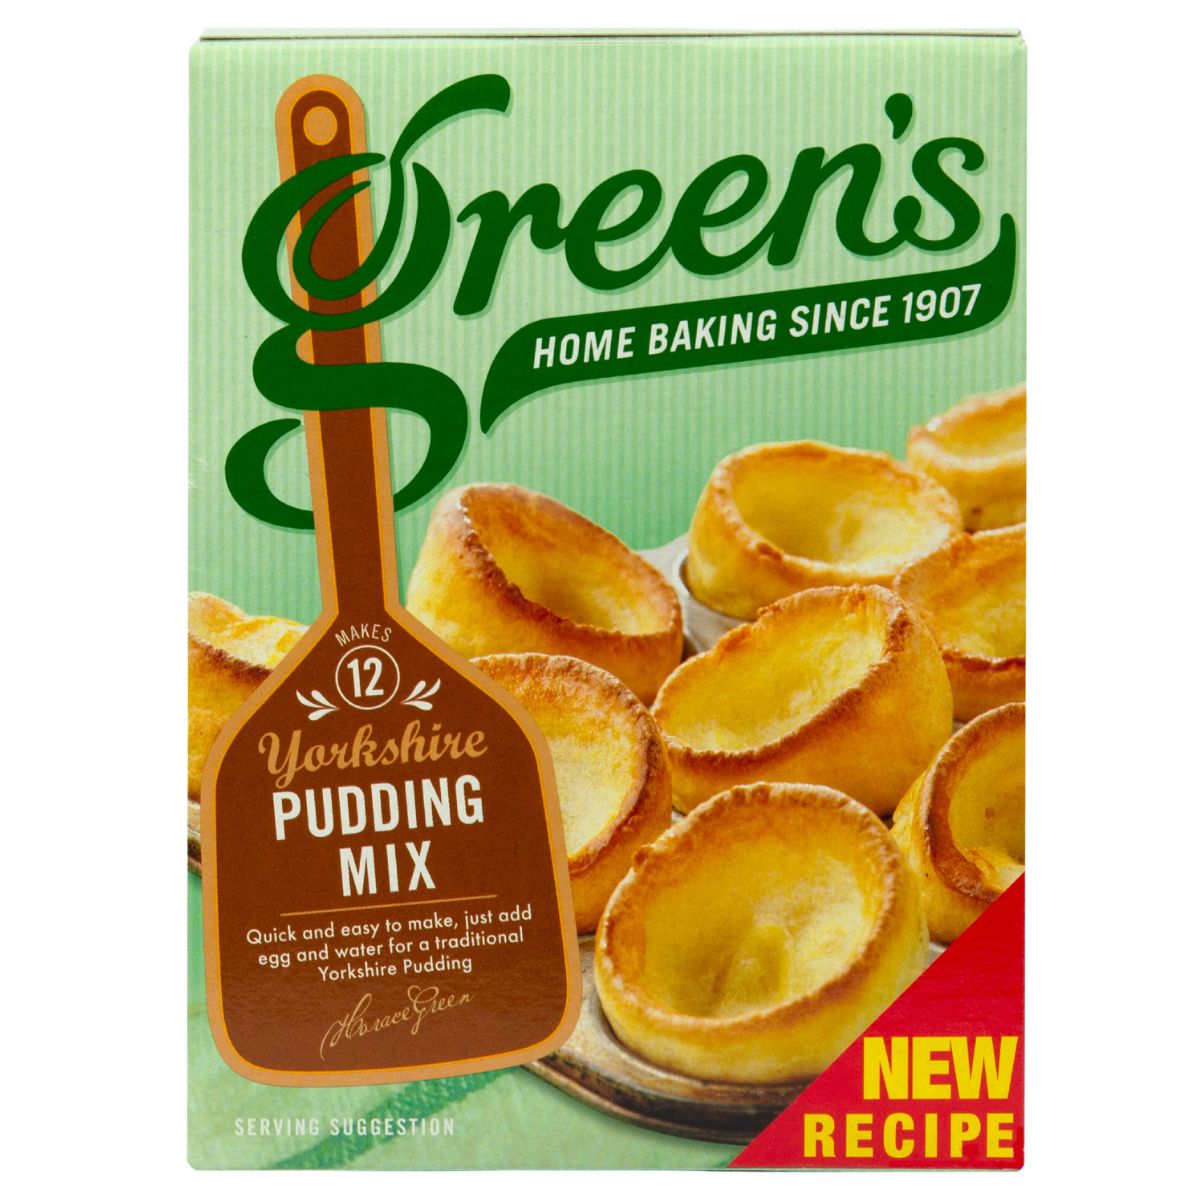 Green's Yorkshire pudding mix.